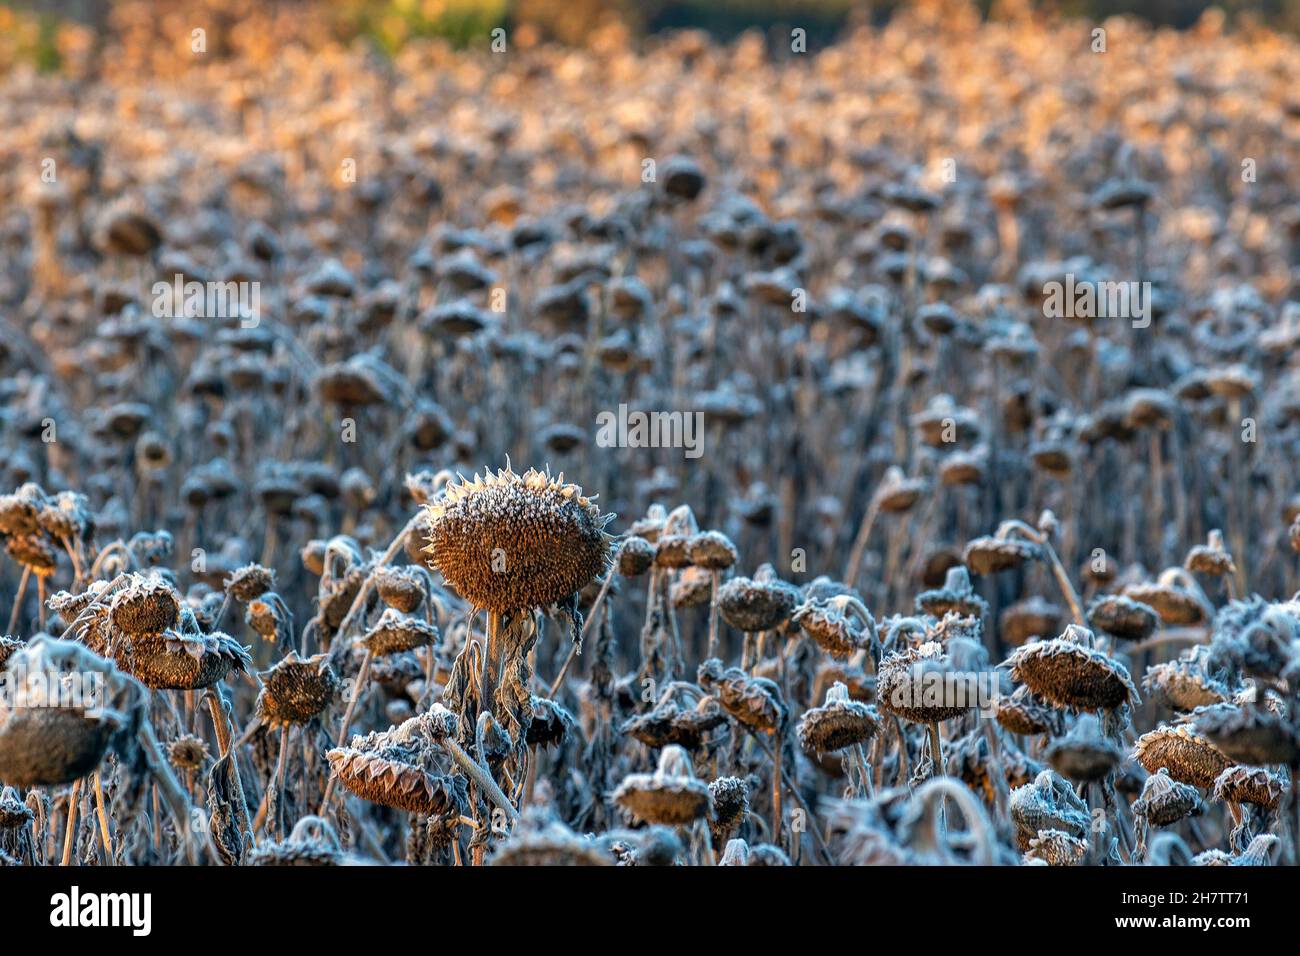 Bretherton, Lancashiure.  UK Weather. 25 Nov 2021.   Cold frosty chilly morning with hoar feathery frost on sunflower seed heads. A stunning  flowering cereal crop when in bloom this six acre field is ready to harvest as the ground hardens with the cool November temperatures. Sunflowers should be harvested harvested as soon as the calyx turns to its brownish/yellow color. Credit: MediaWorldImages/AlamyLiveNews Stock Photo